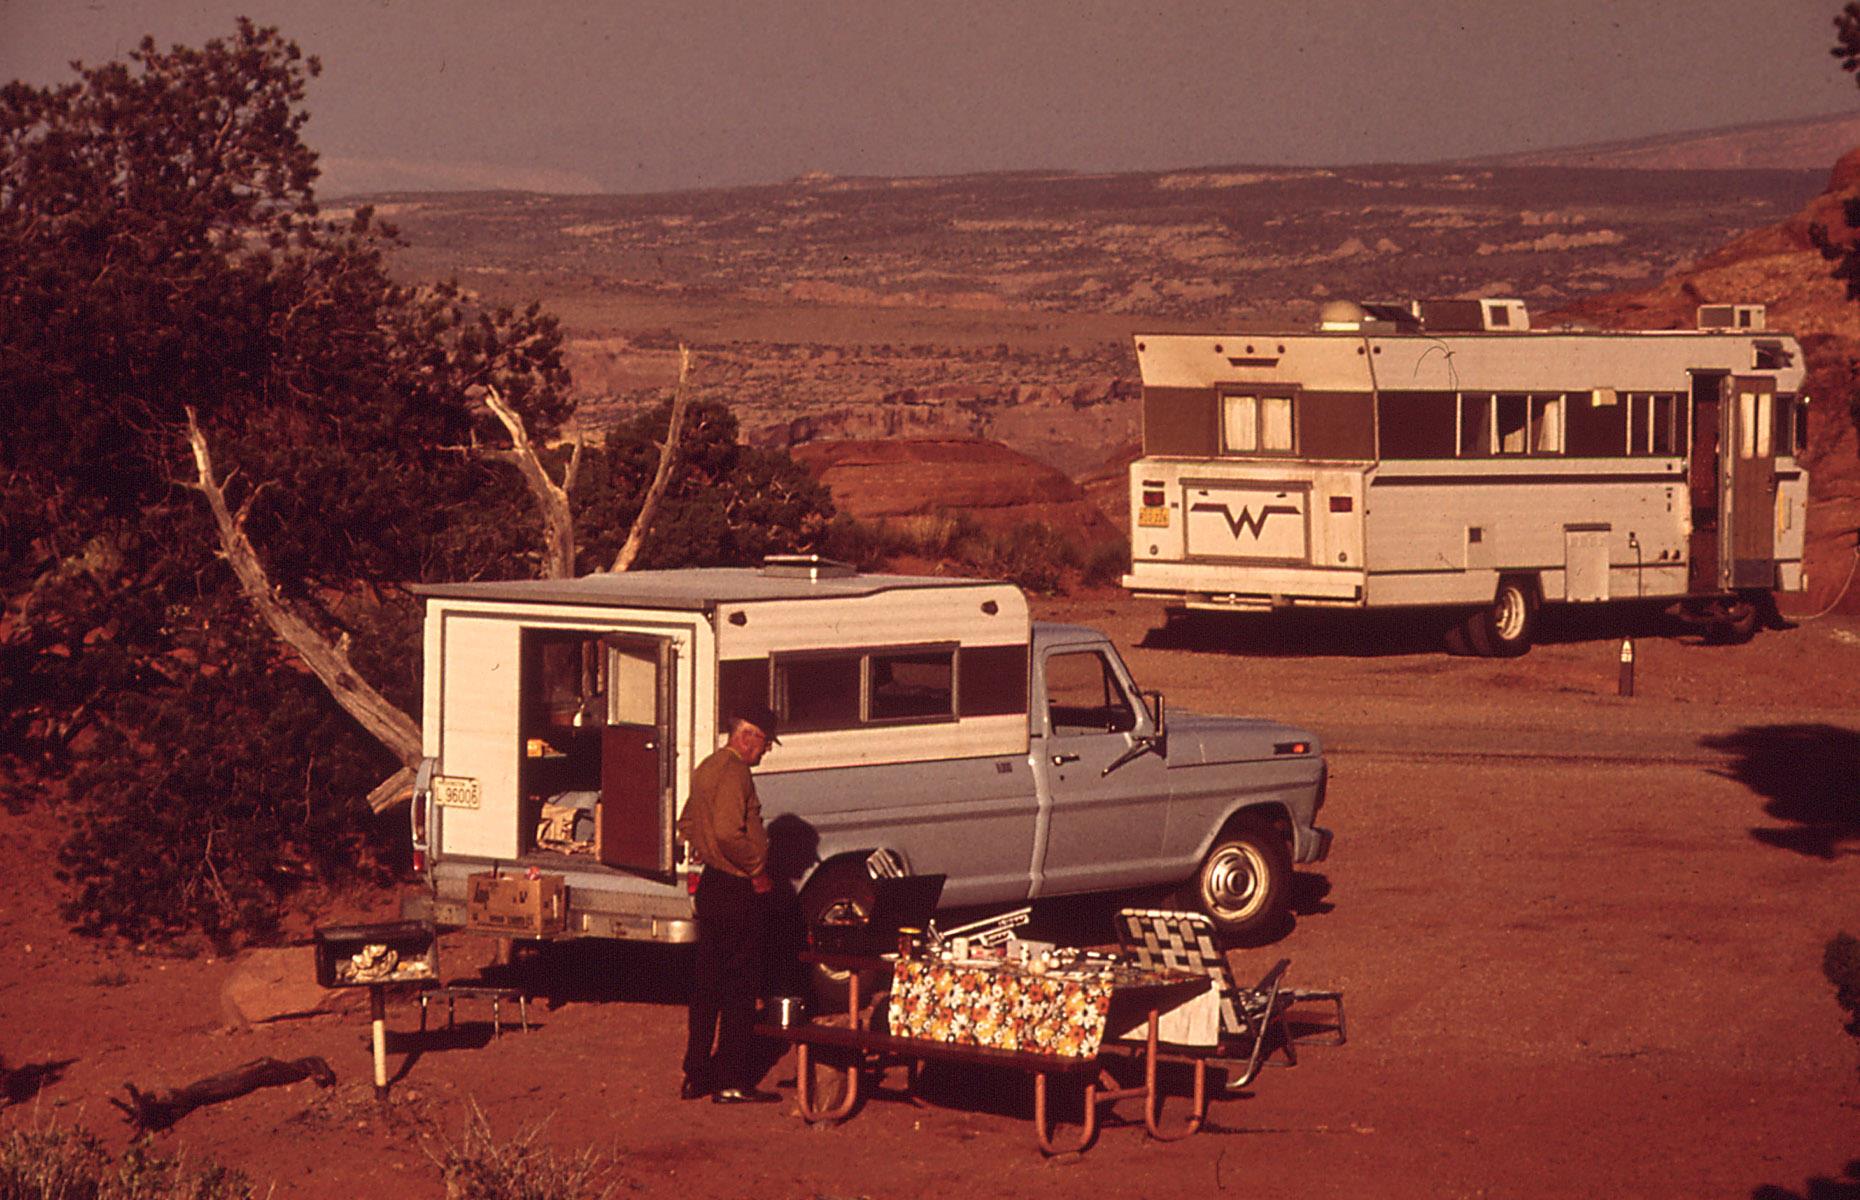 This snap shows a Winnebago motorhome in its natural habitat: in America's beautiful backyard with far-reaching views out across the countryside. The red-tinged photo captures Arches National Park, Utah in the Seventies, with the folks in the foreground setting up for an alfresco dinner.